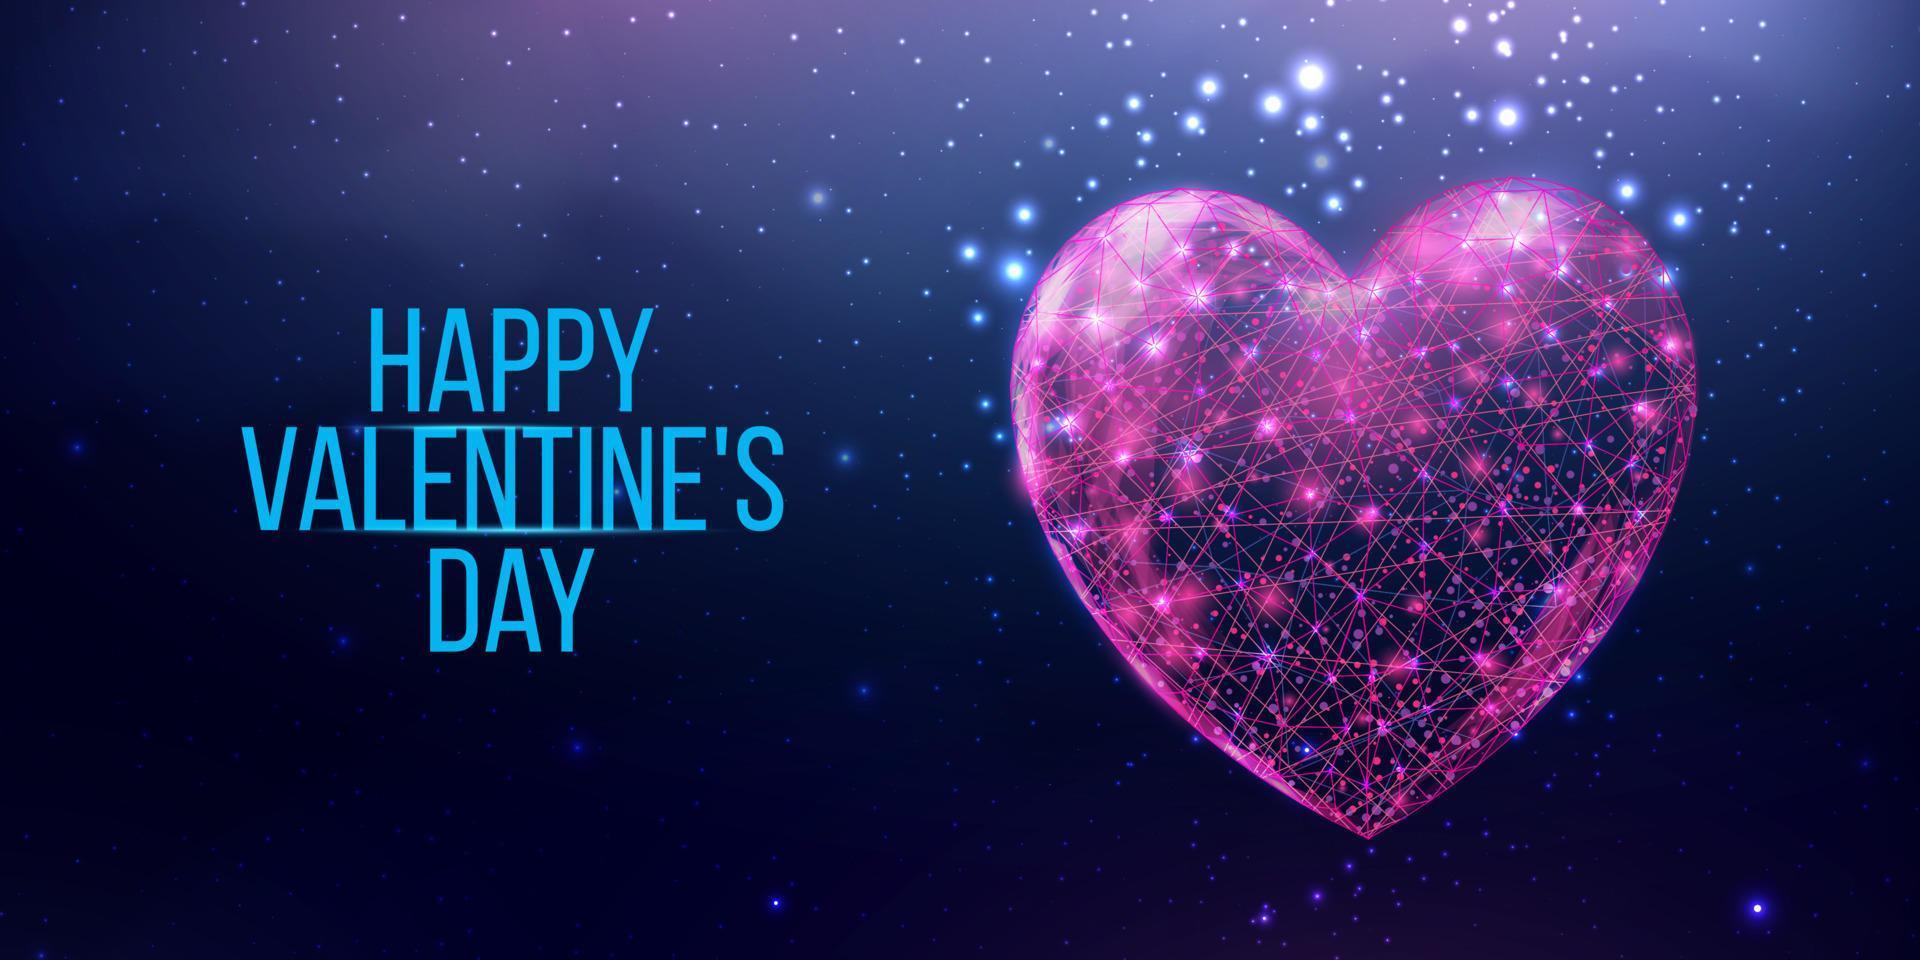 Happy Valentine's day banner. Wireframe heart in low poly style.   Abstract modern 3d vector illustration on dark blue background.